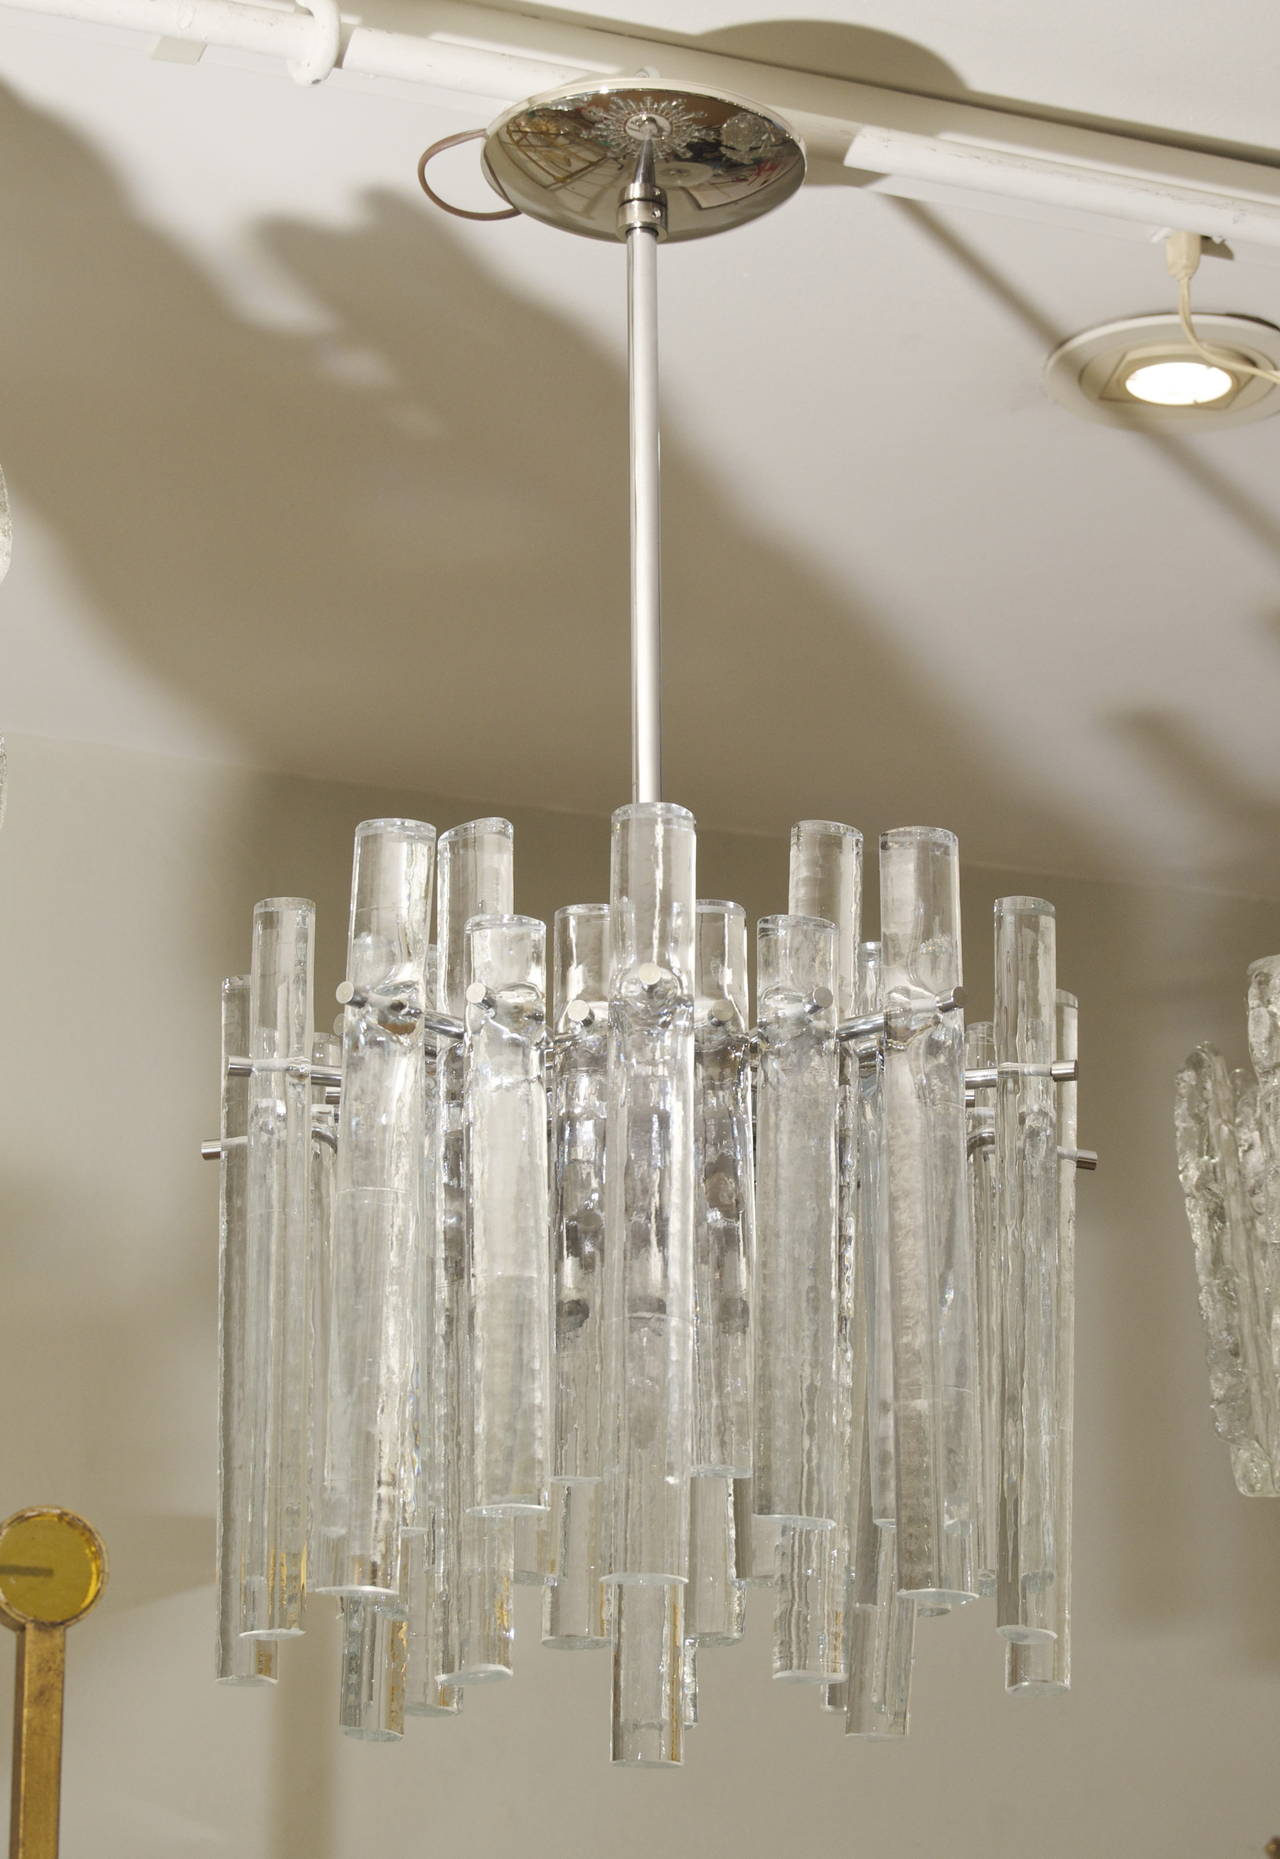 This elegant stream lined ice crystal fixture will complement all decors.

Three E-14 base bulbs radiate from body, up to 40 watts per bulb, and one medium base downlight bulb, up to 75 watts. New wiring. 

Height is of light fixture only.